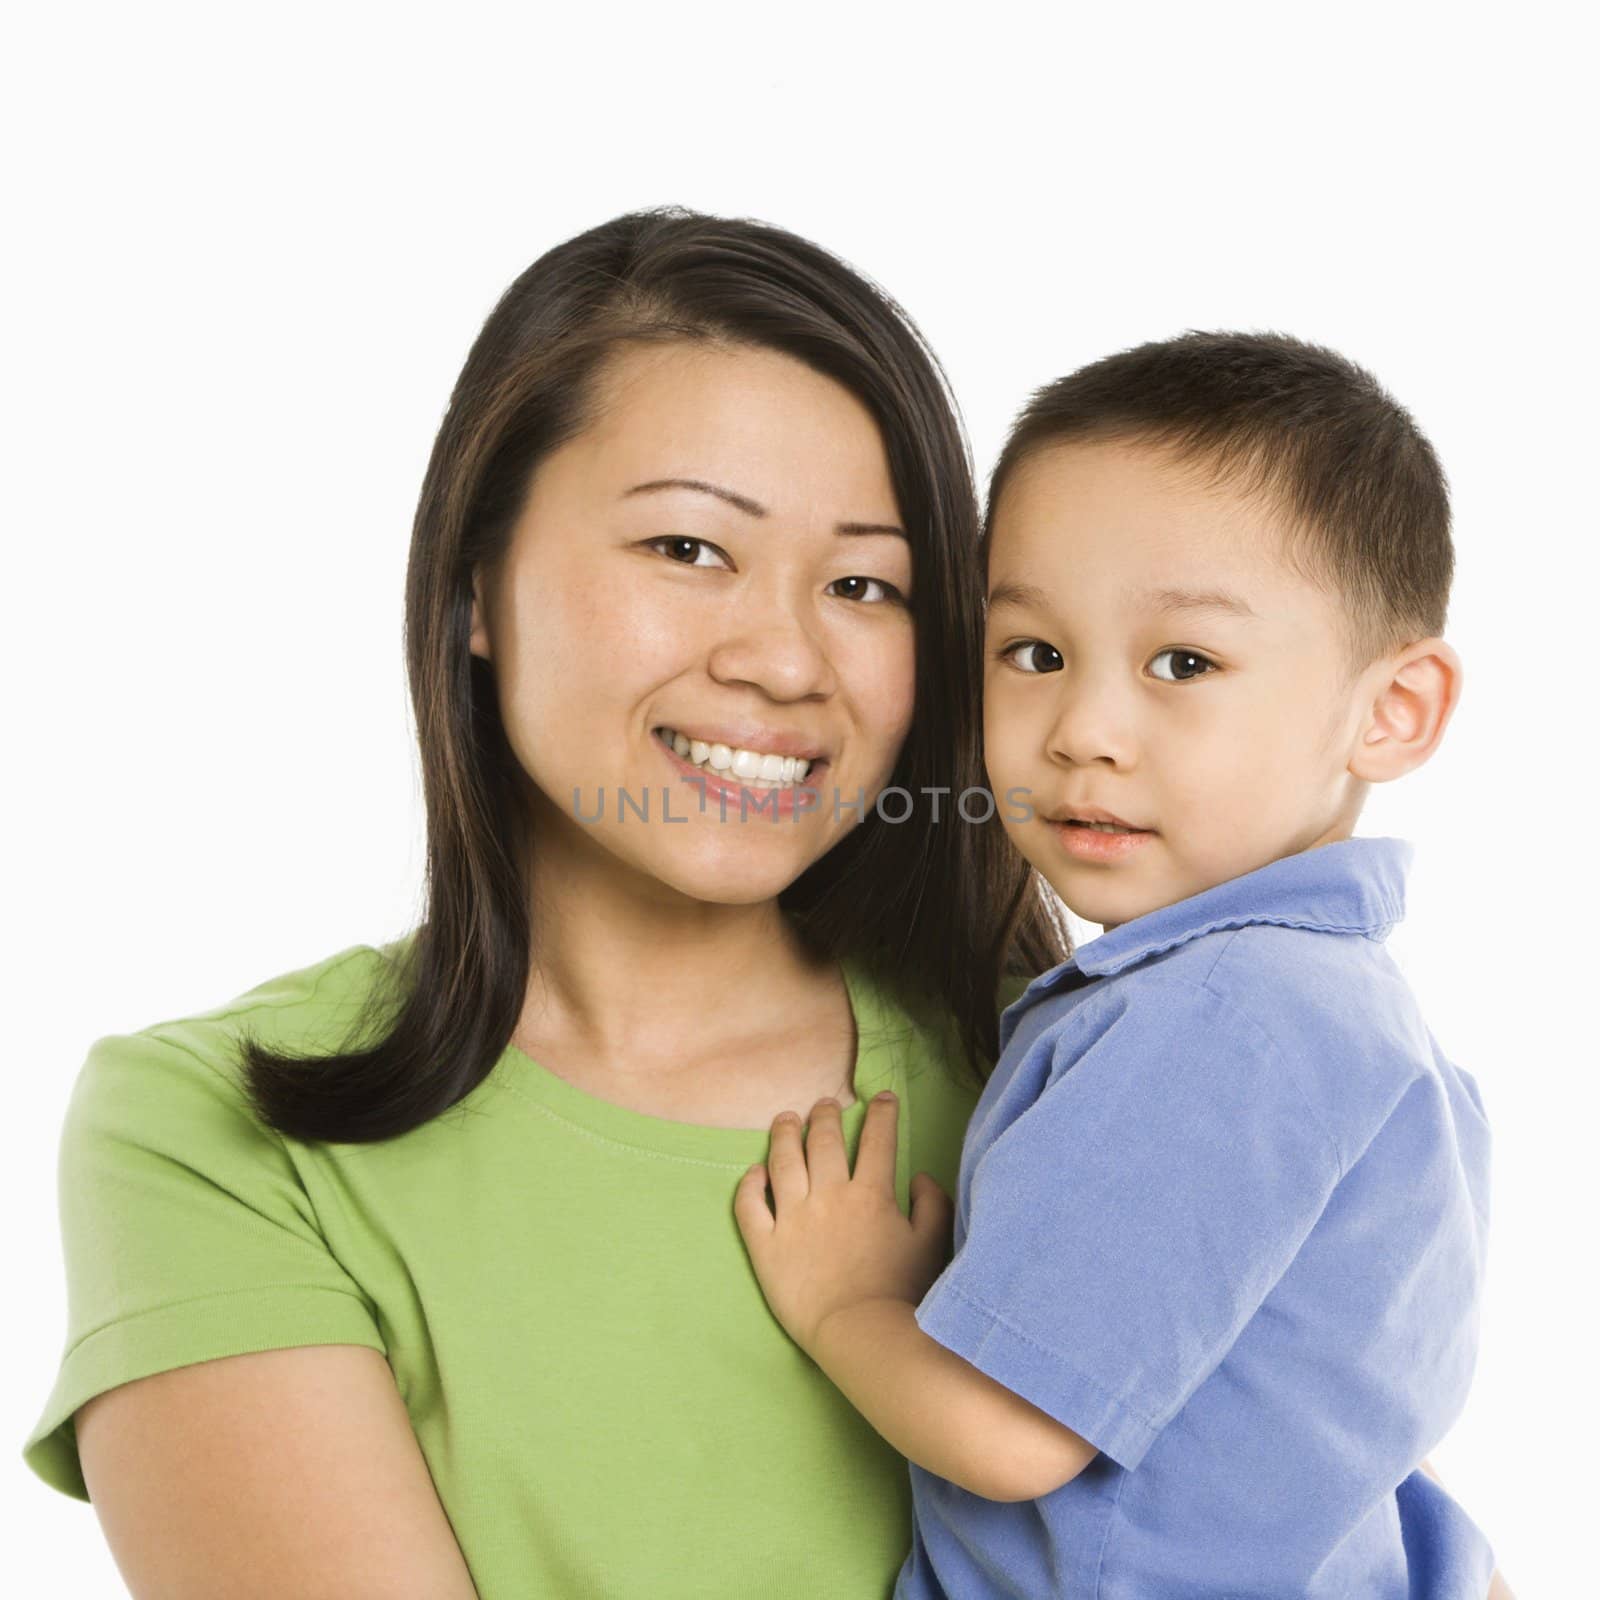 Asian mother holding son smiling in front of white background.